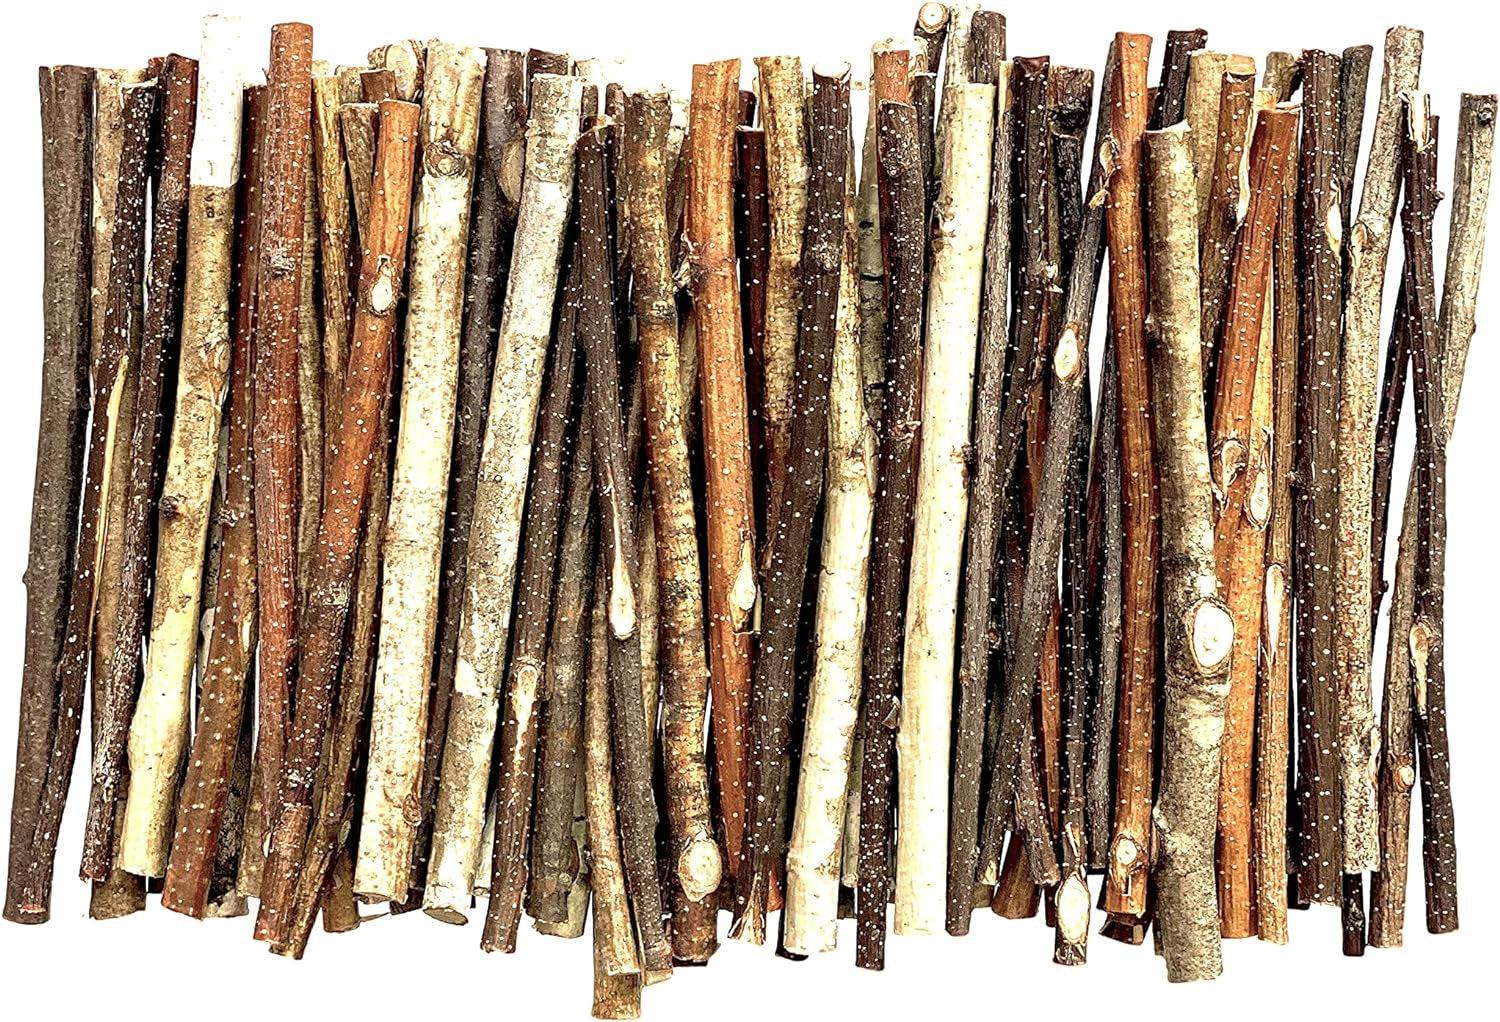 50 Psc. Birch Twigs – 100% Natural Decorative Birch Branches for Vases, Centerpieces & DIY Crafts – Birch Sticks for Decorating (16-18 Inch)